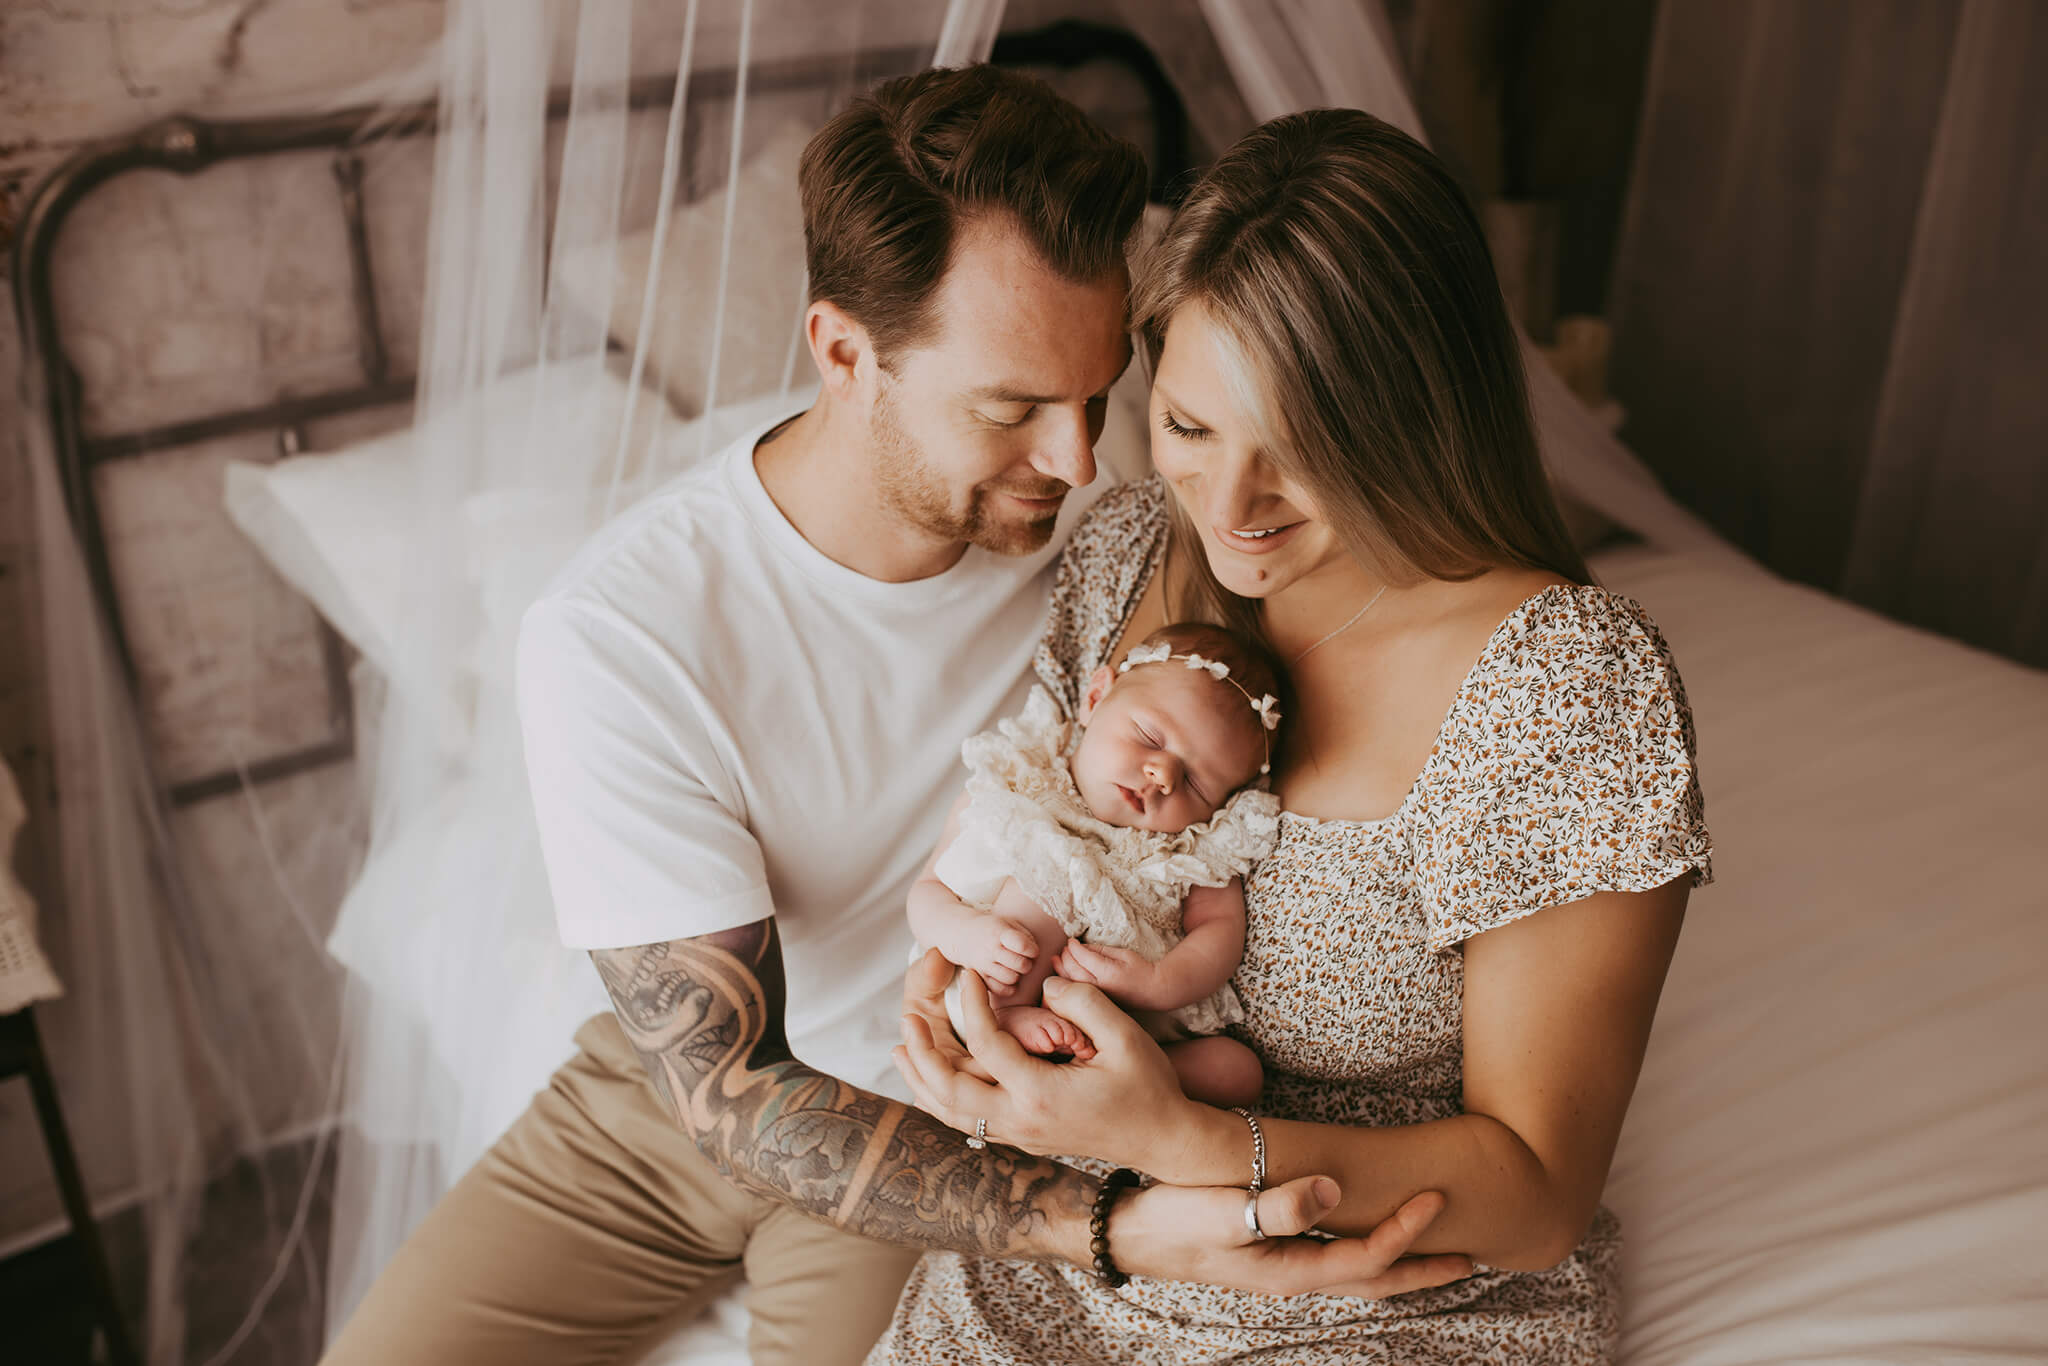 New parents sit on a bed hugging while mom holds their newborn baby girl in her arms